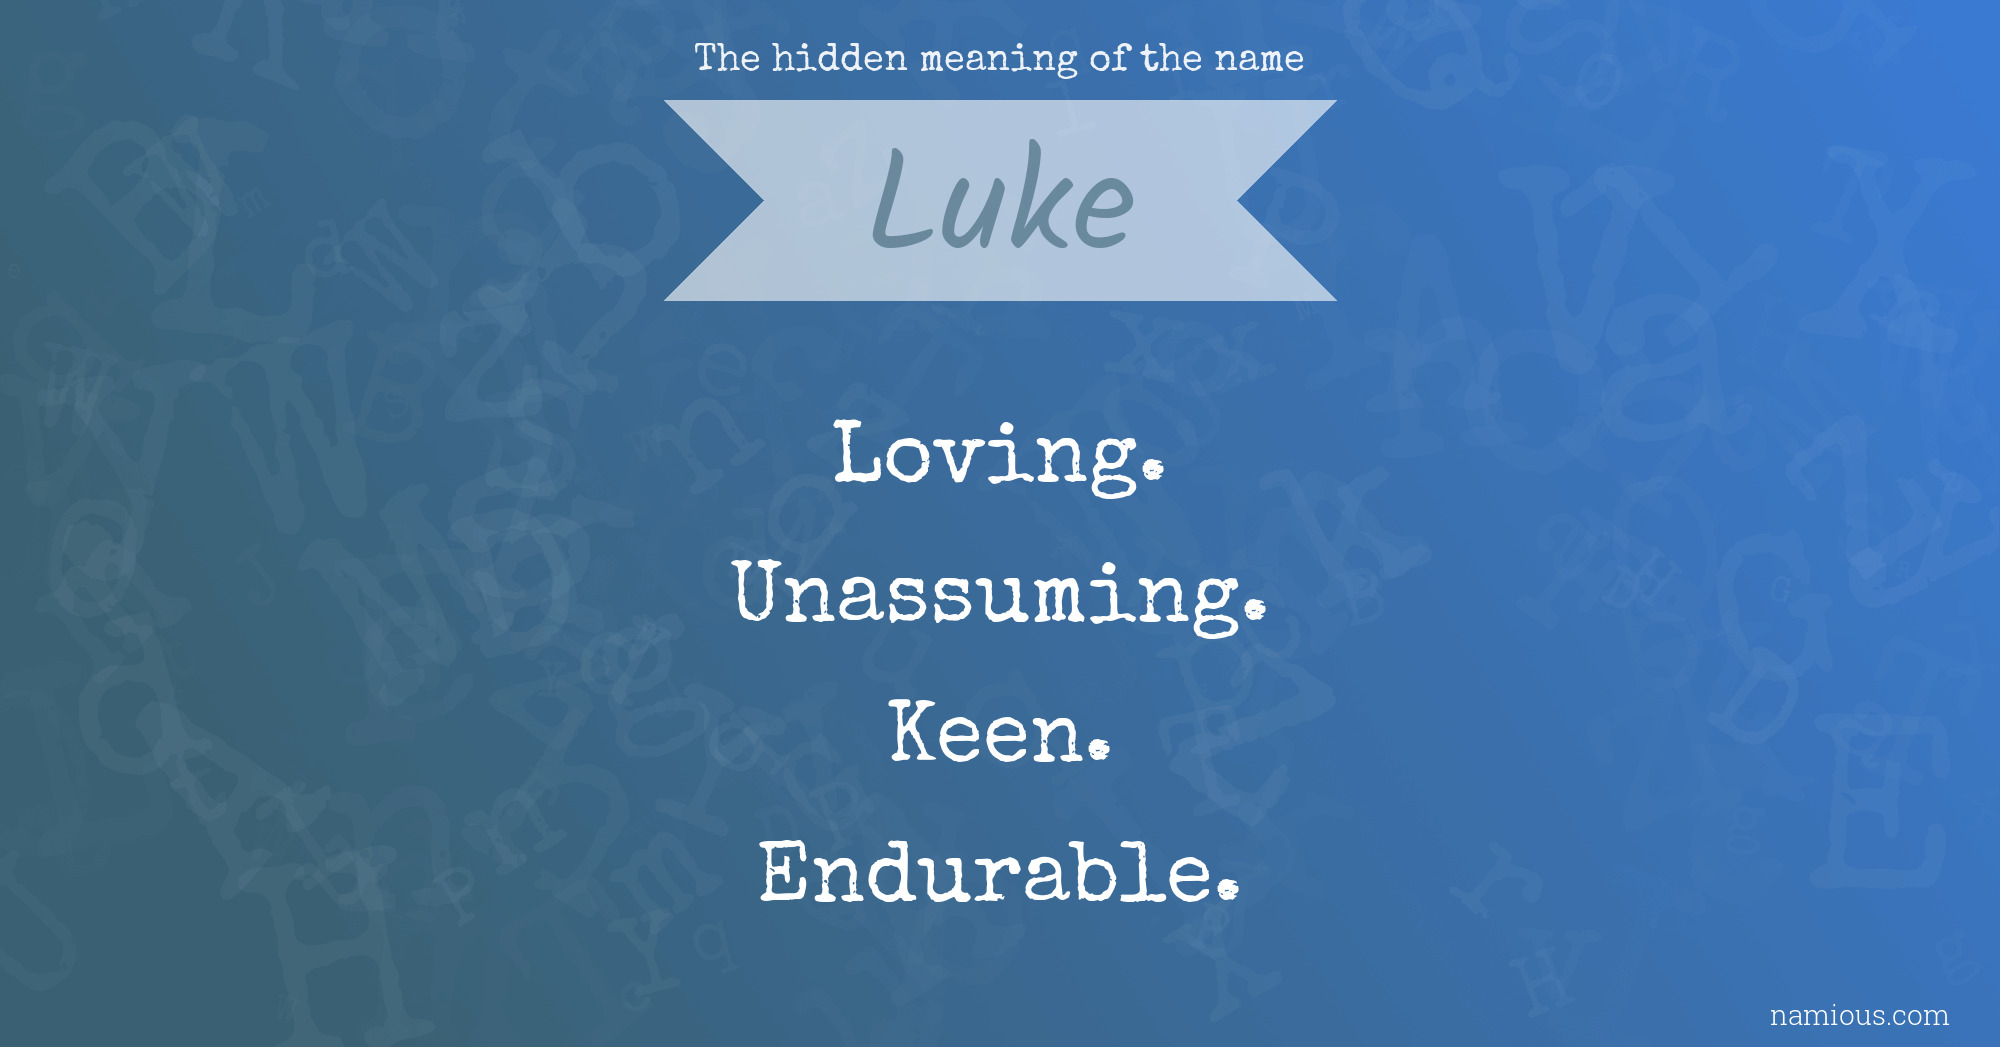 The hidden meaning of the name Luke